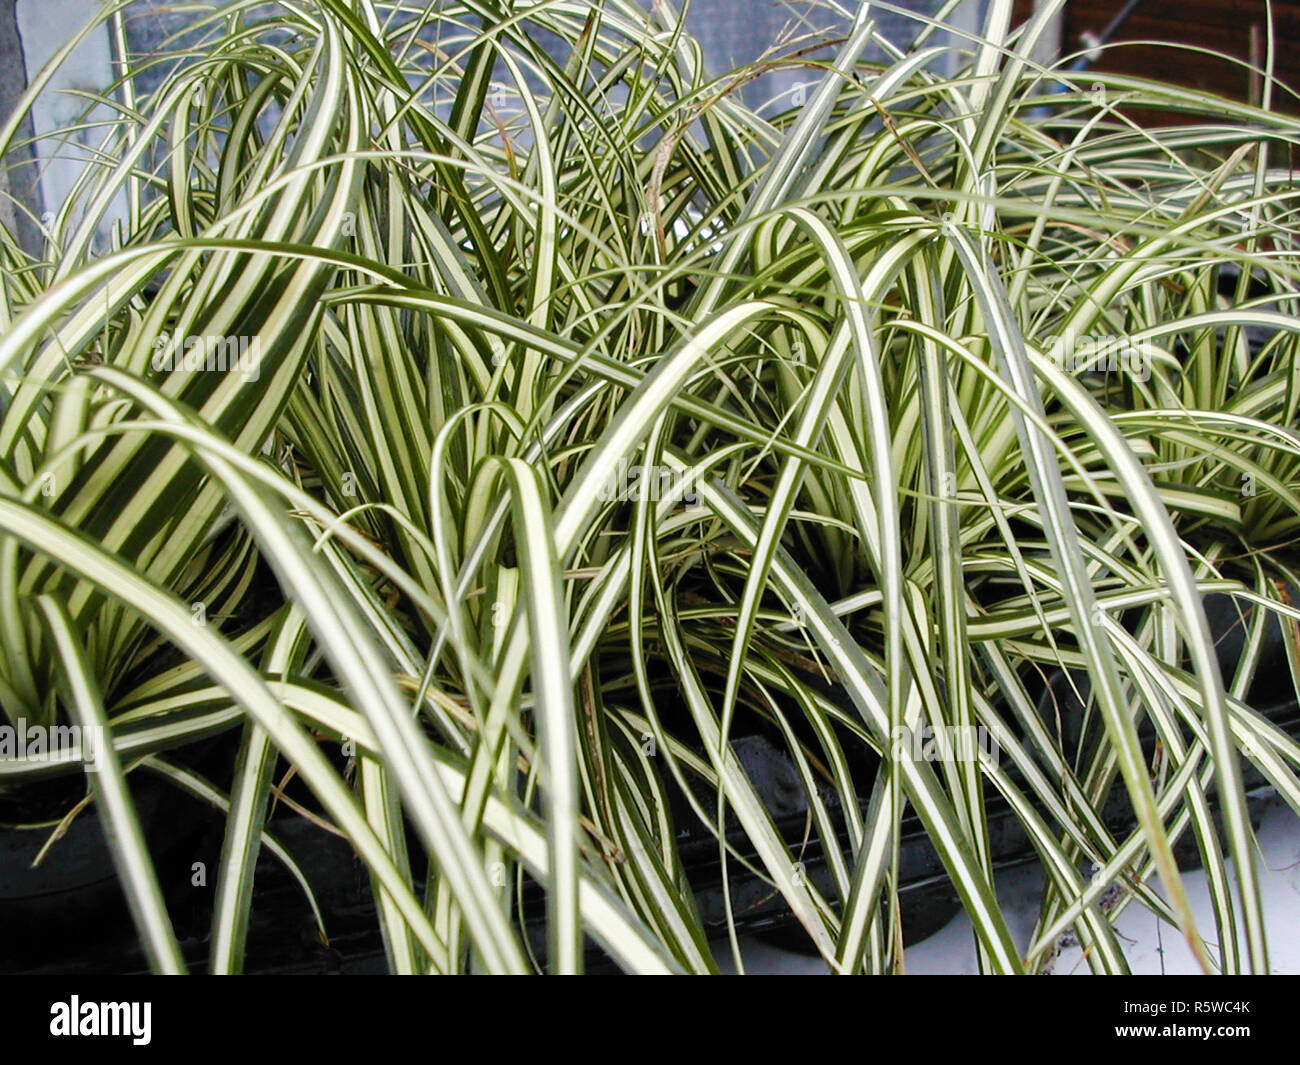 Ornamental Sedge Carex Evergold with green and creamy to yellow strap like leaves Stock Photo